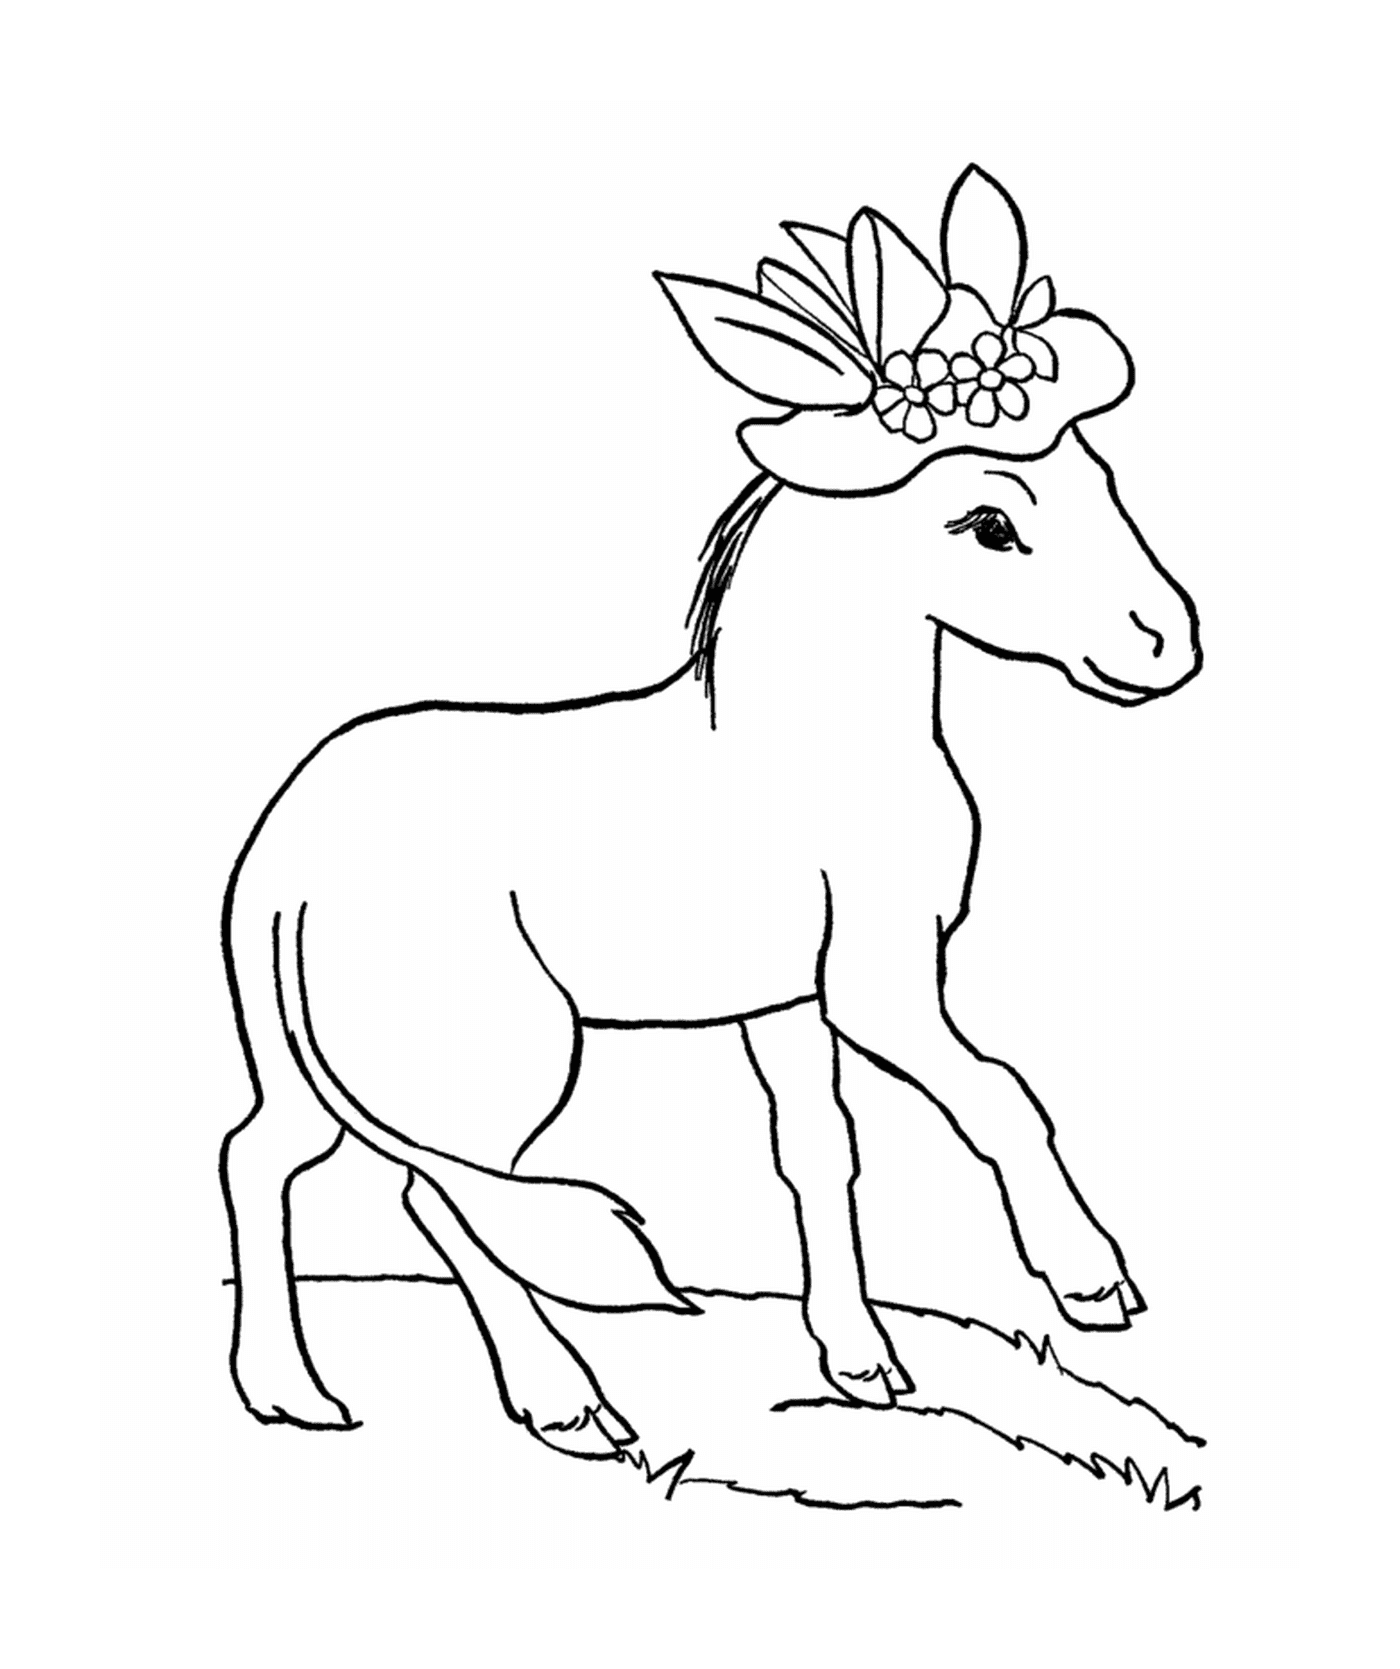  A horse with a flower on its head 